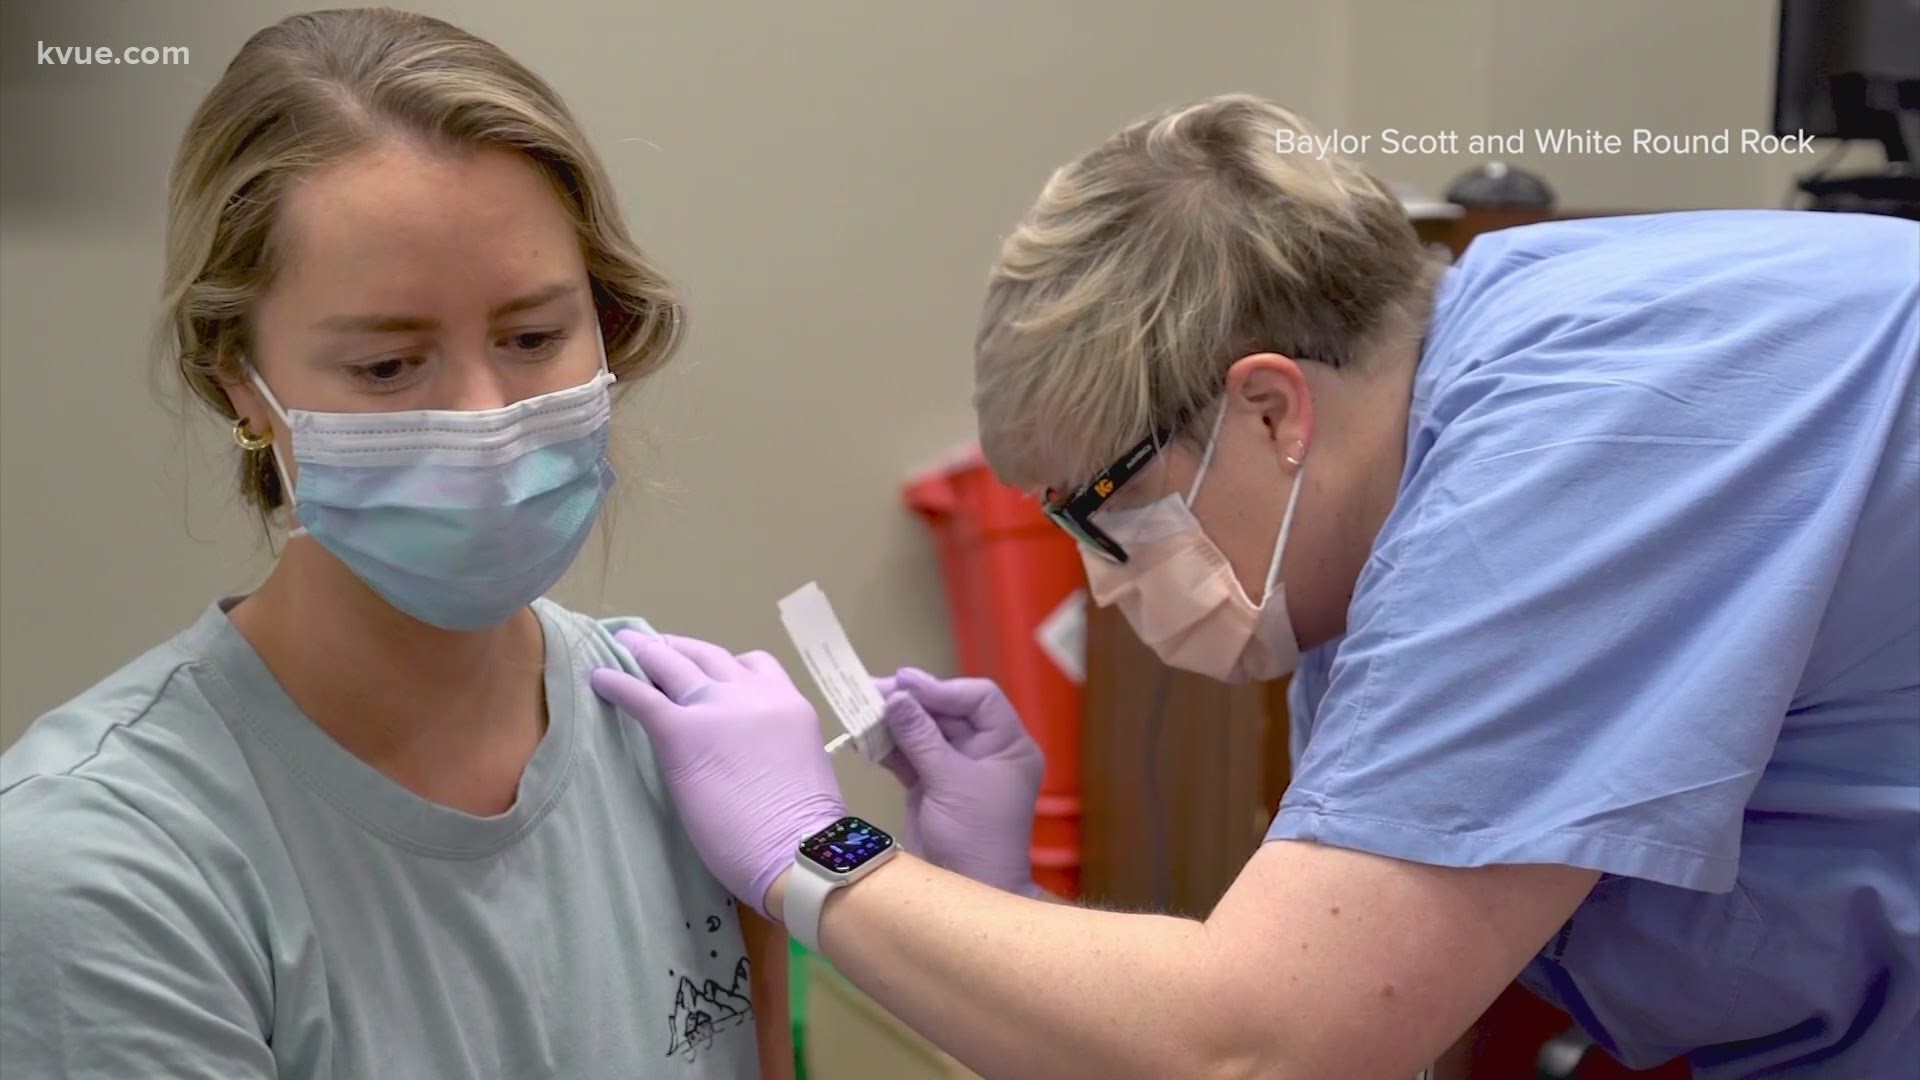 Veterinarians are offering help to speed up the vaccination process.